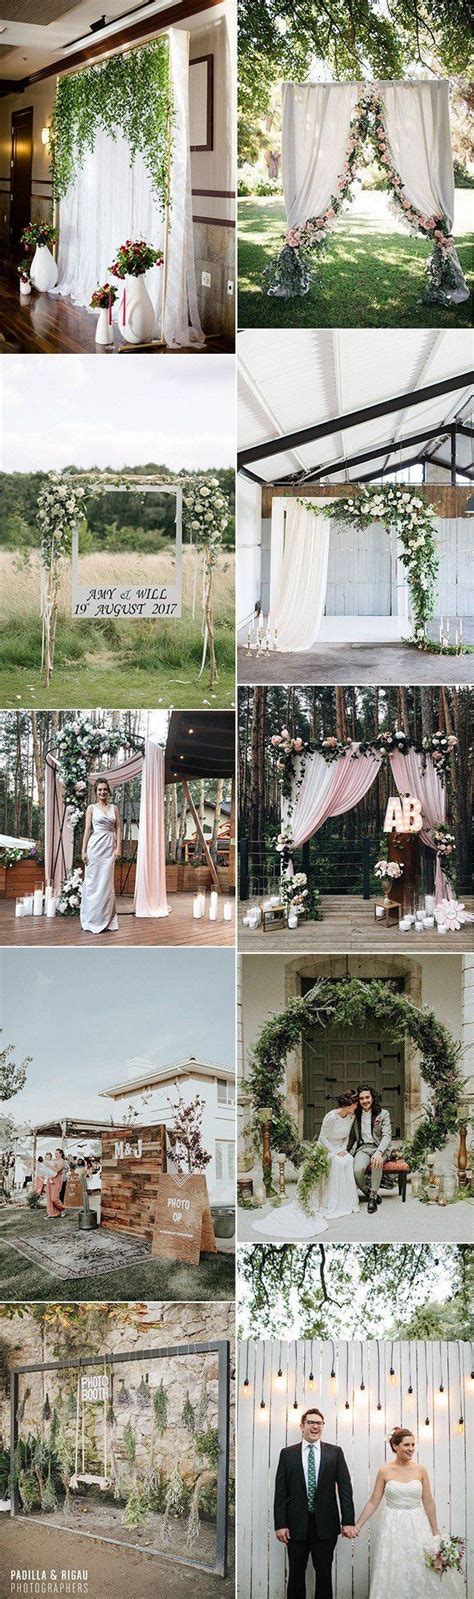 Wedding Trends 2018 Archives Oh Best Day Ever With Regard To Ucwords